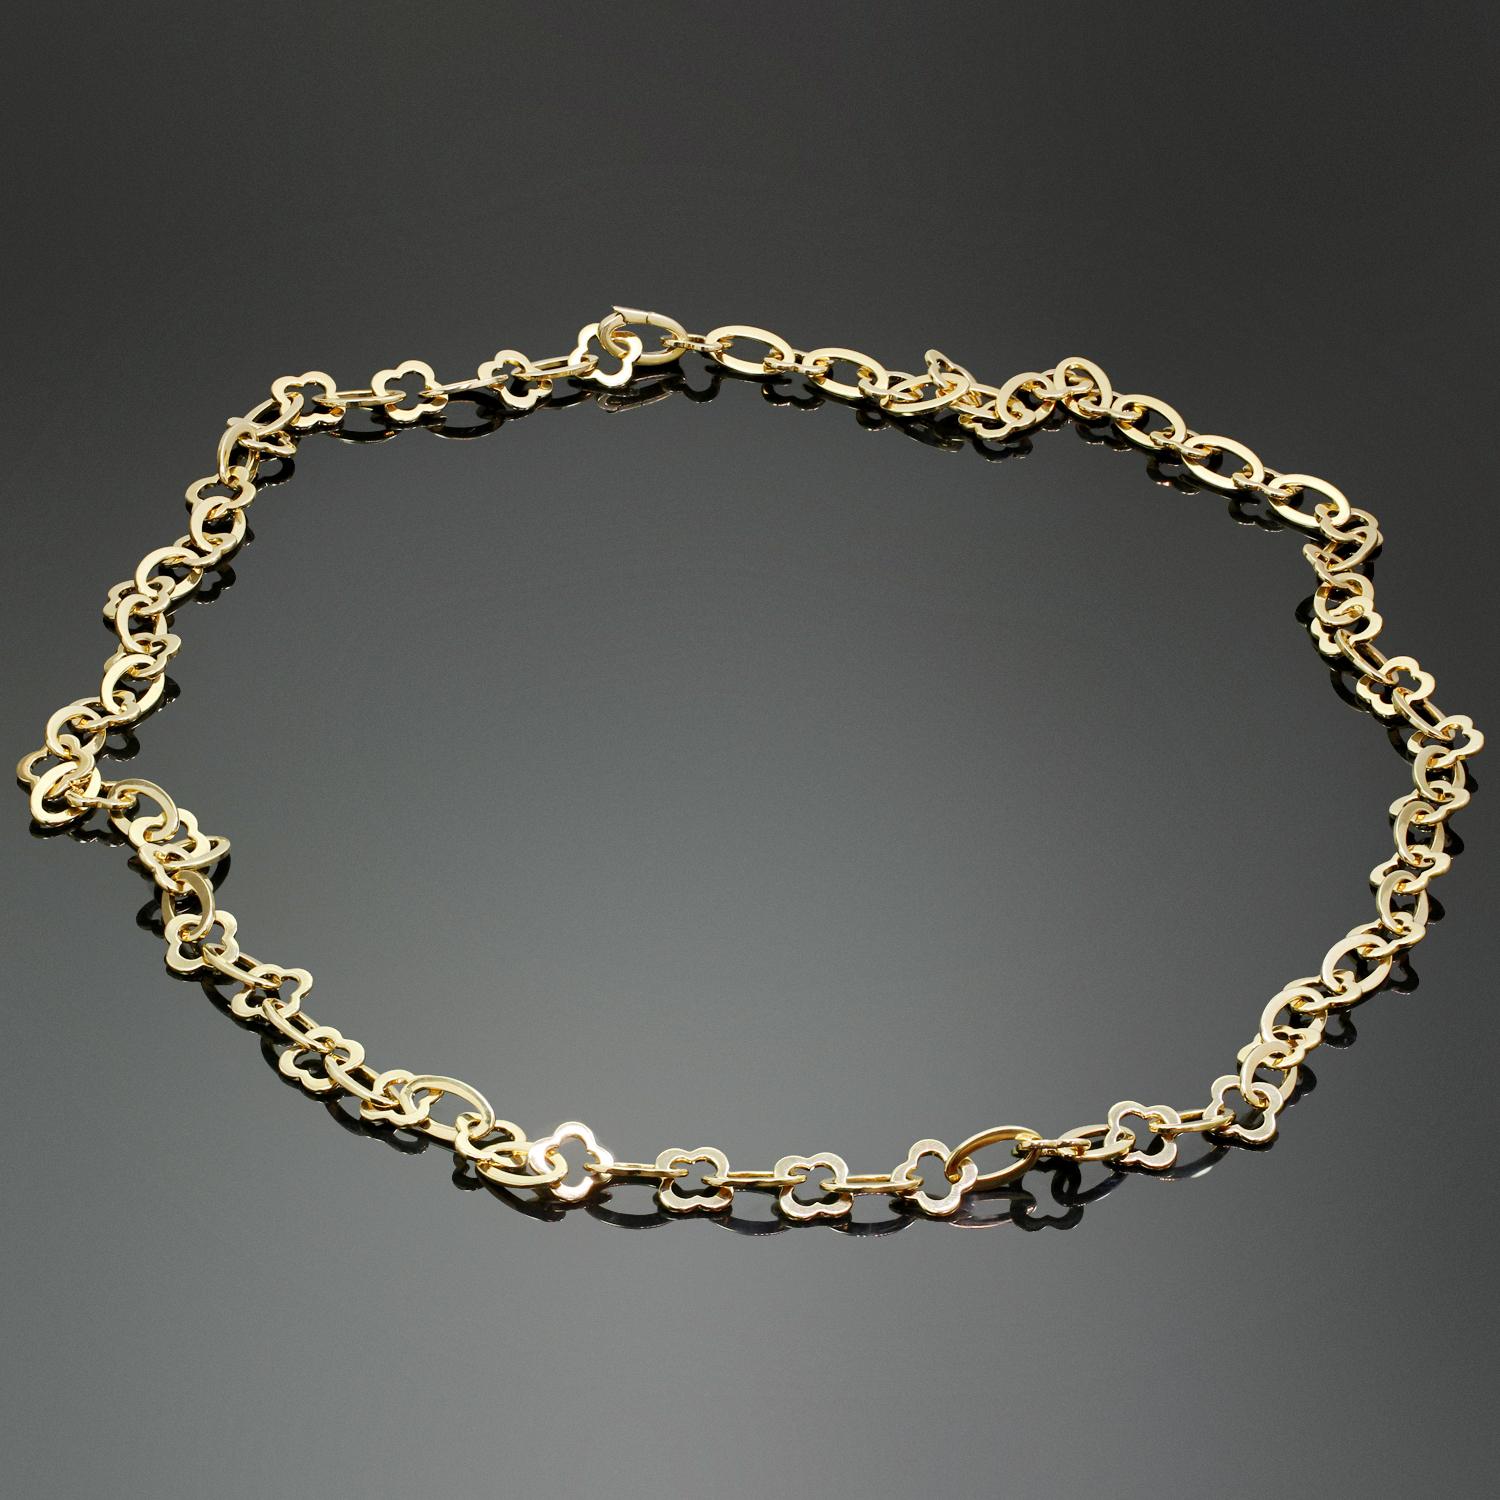 This classic long necklace from the iconic Byzantine Alhambra collection by Van Cleef & Arpels is crafted in 18k yellow gold and features a series of polished gold openwork Alhambra links, spaced by polished gold oval links. Made in France circa